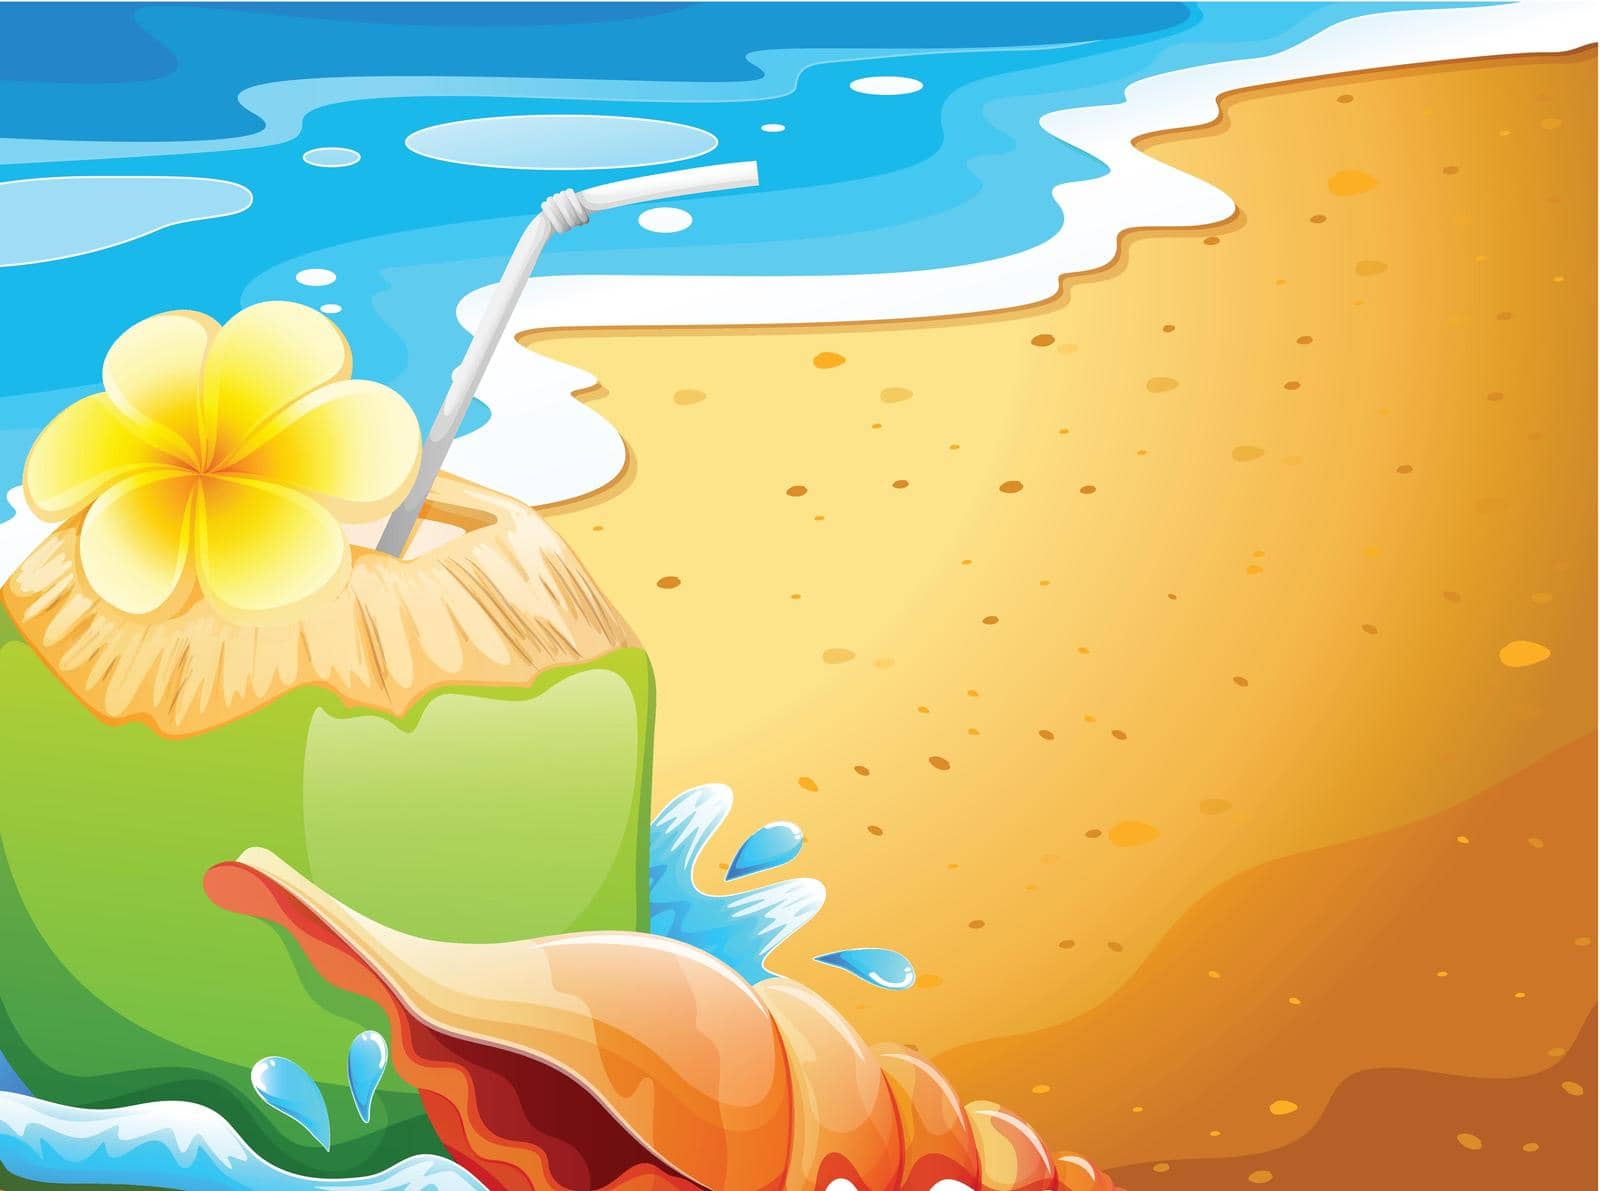 Illustration of a refreshing drink at the beach